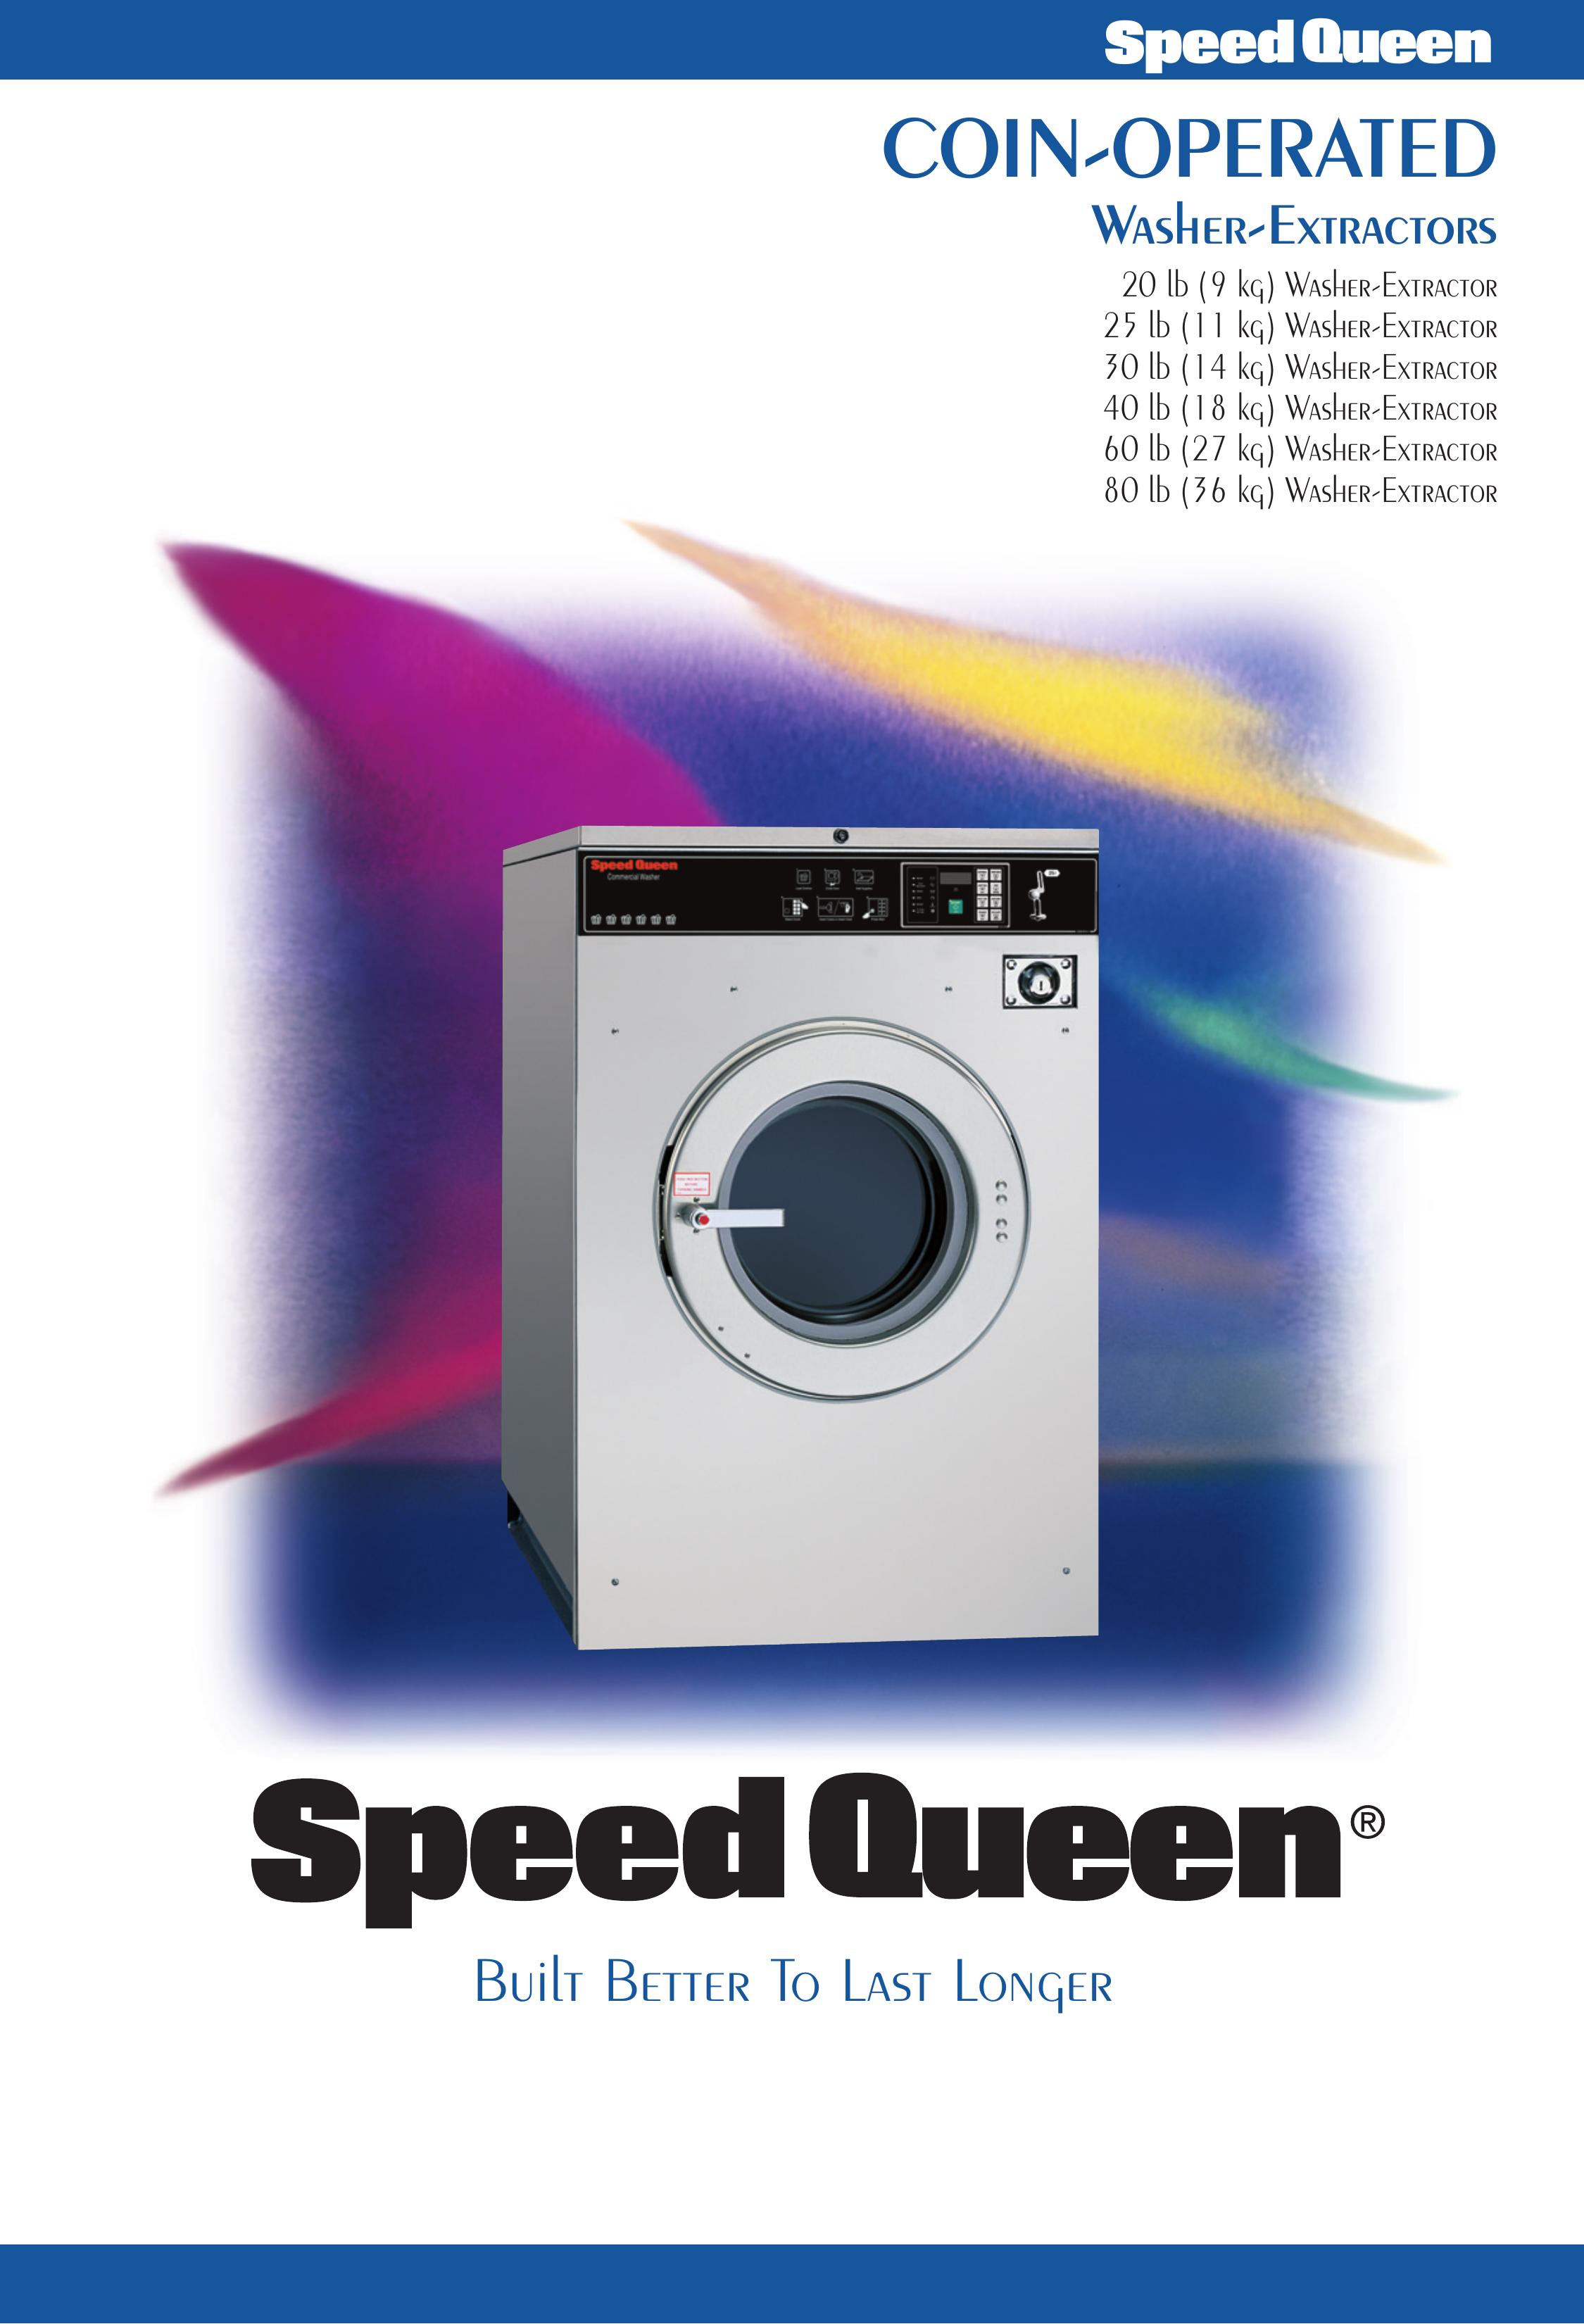 Speed Queen 80 lb Washer User Manual